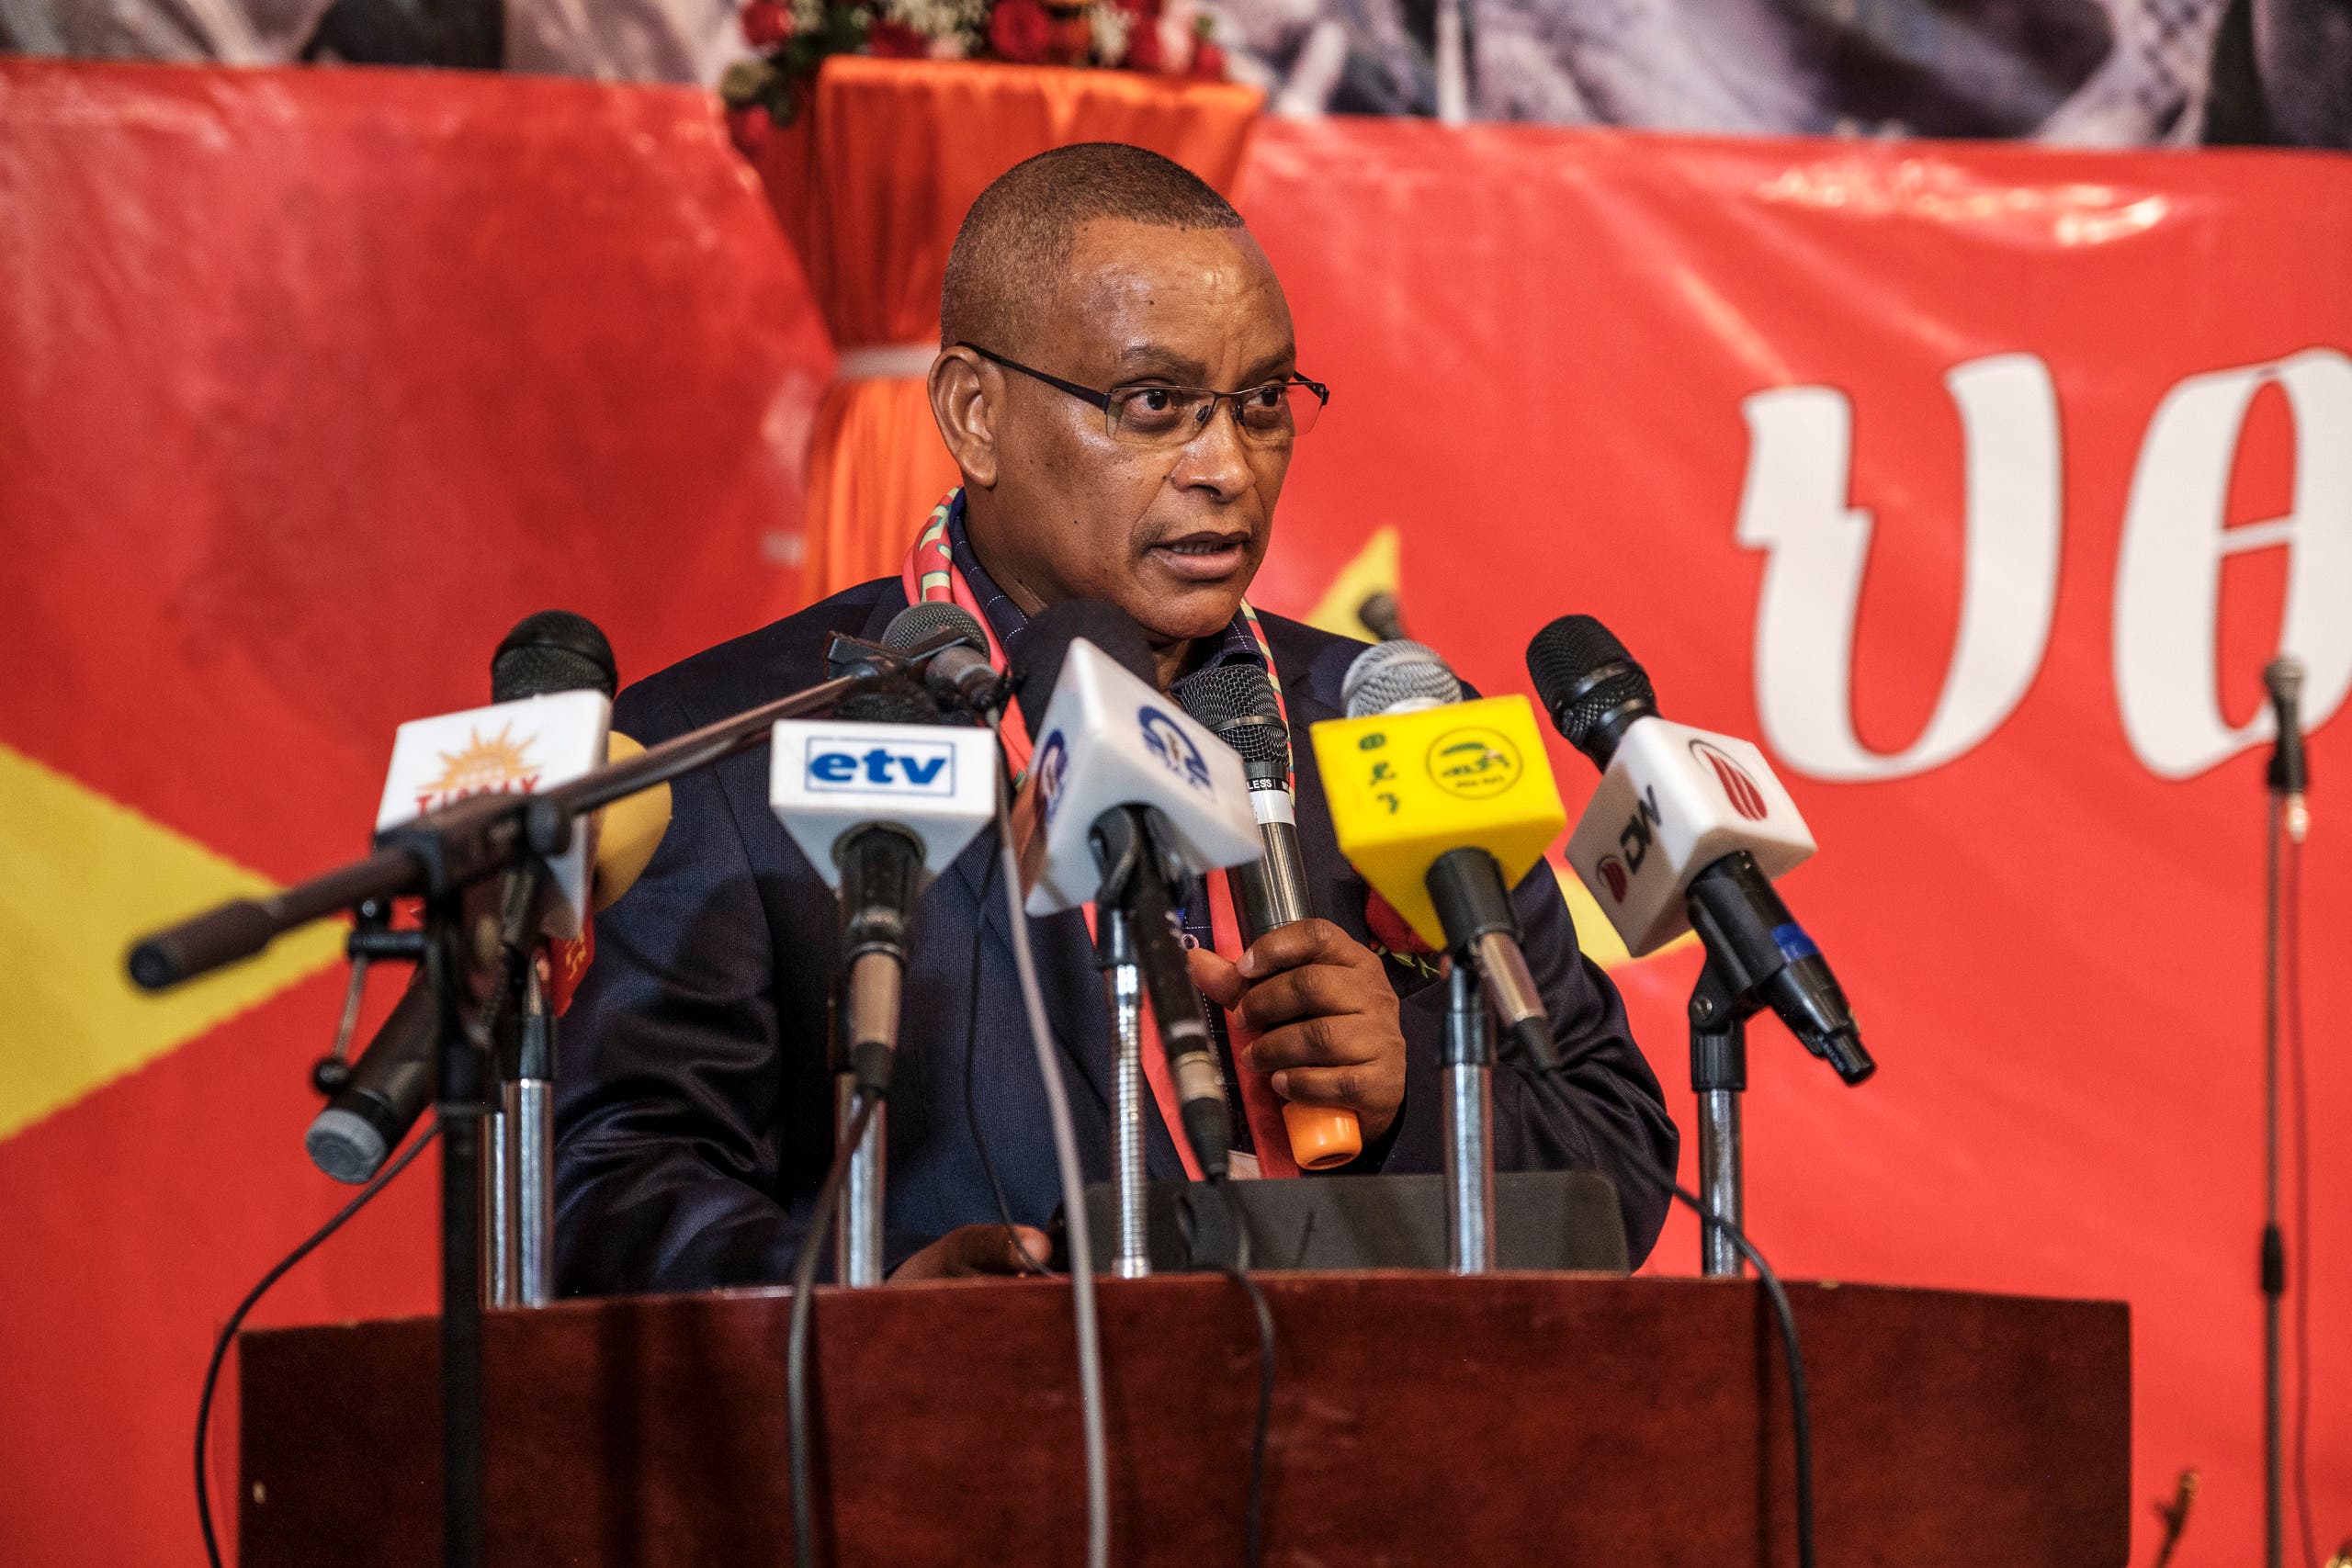 Debretsion Gebremichael, Chairman of the Tigray People's Liberation Front (TPLF) addresses the public during the TPLF First Emergency General Congress in the city of Mekelle, Ethiopia. (File photo)